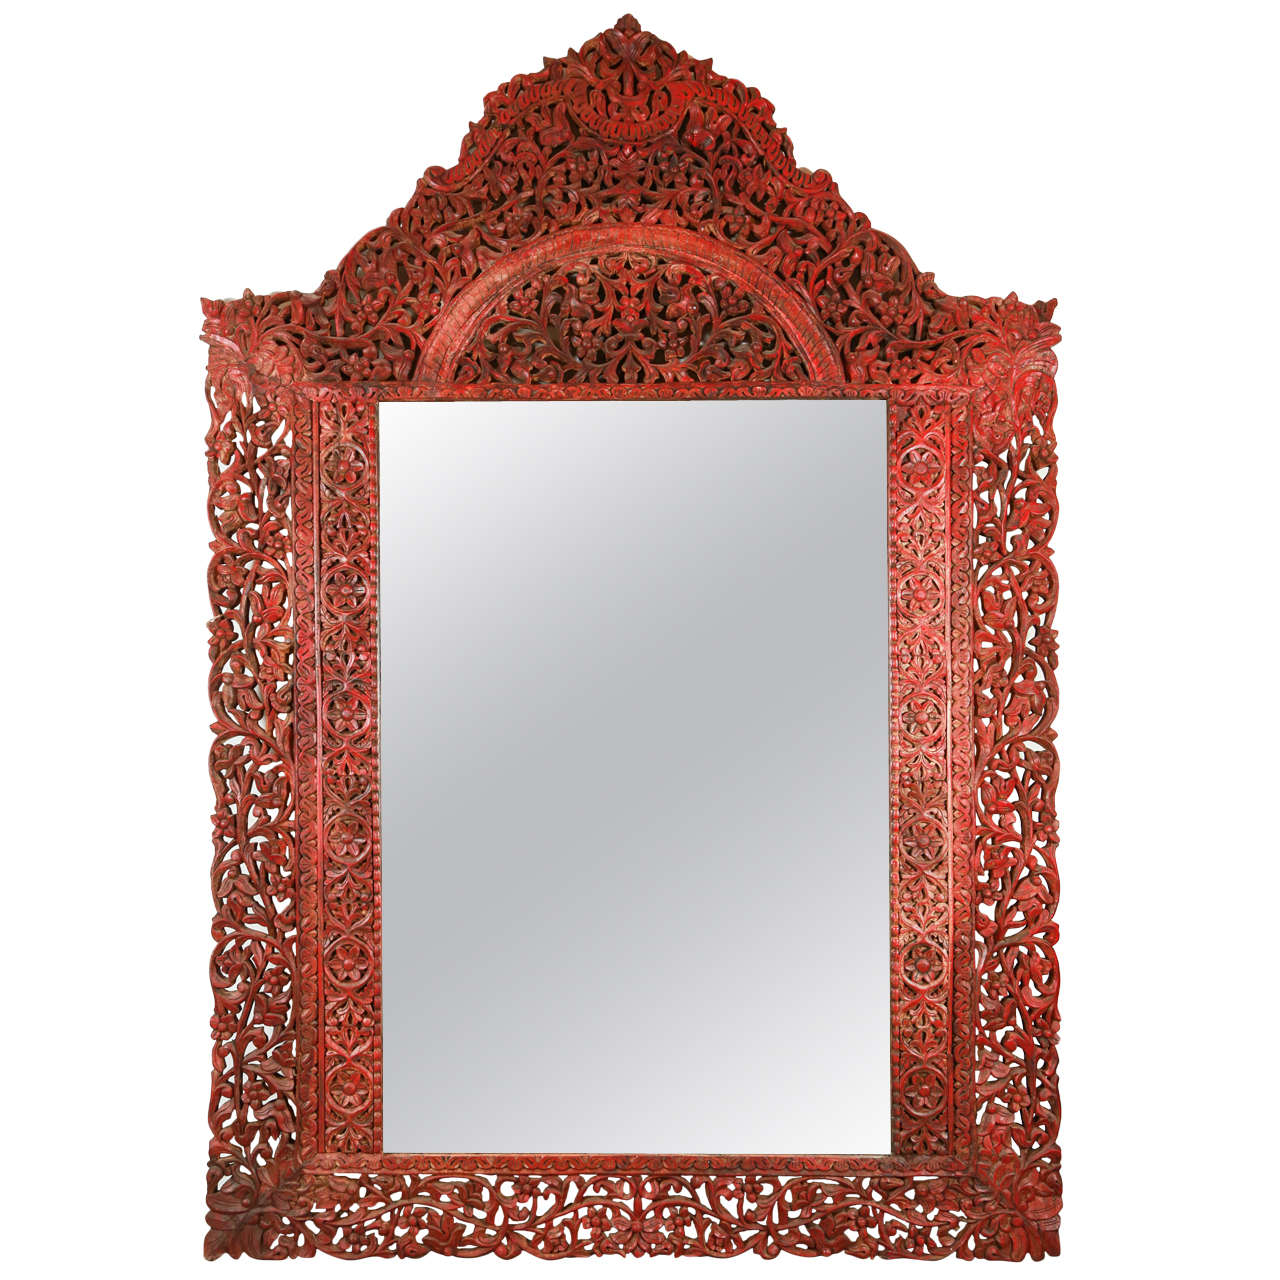 Giant Hand-Carved Anglo-Indian Mirror